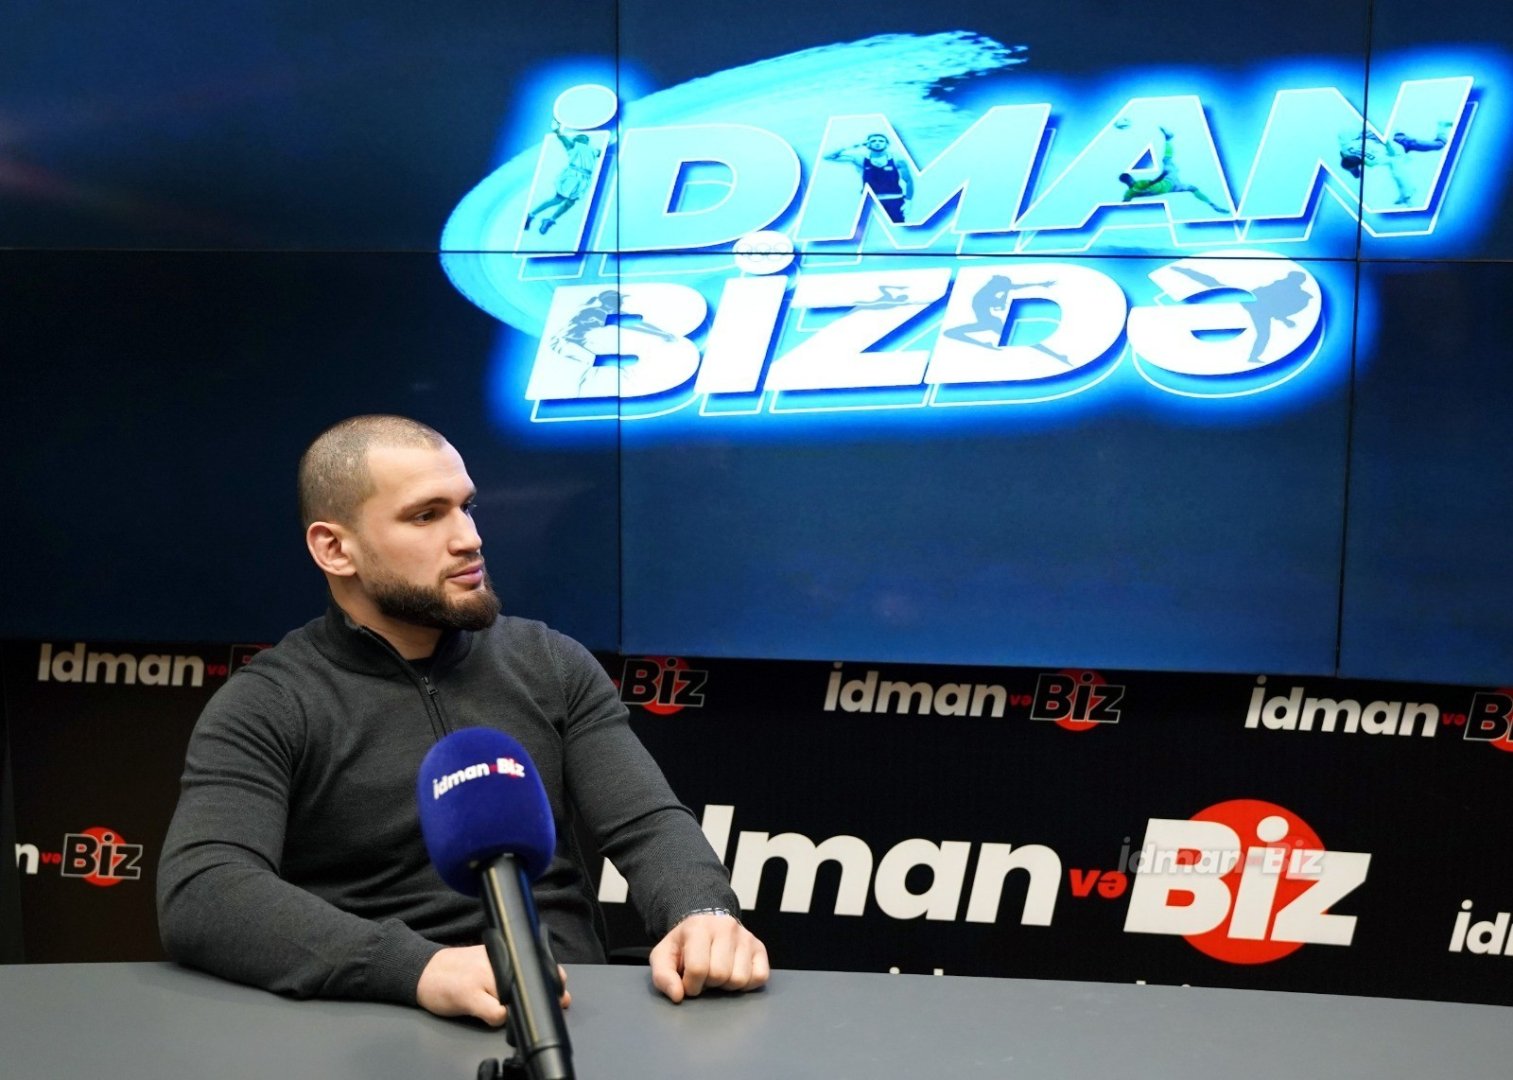 Azerbaijani sportsman comments on his upcoming fight and shares his plans for future (PHOTO/VIDEO)